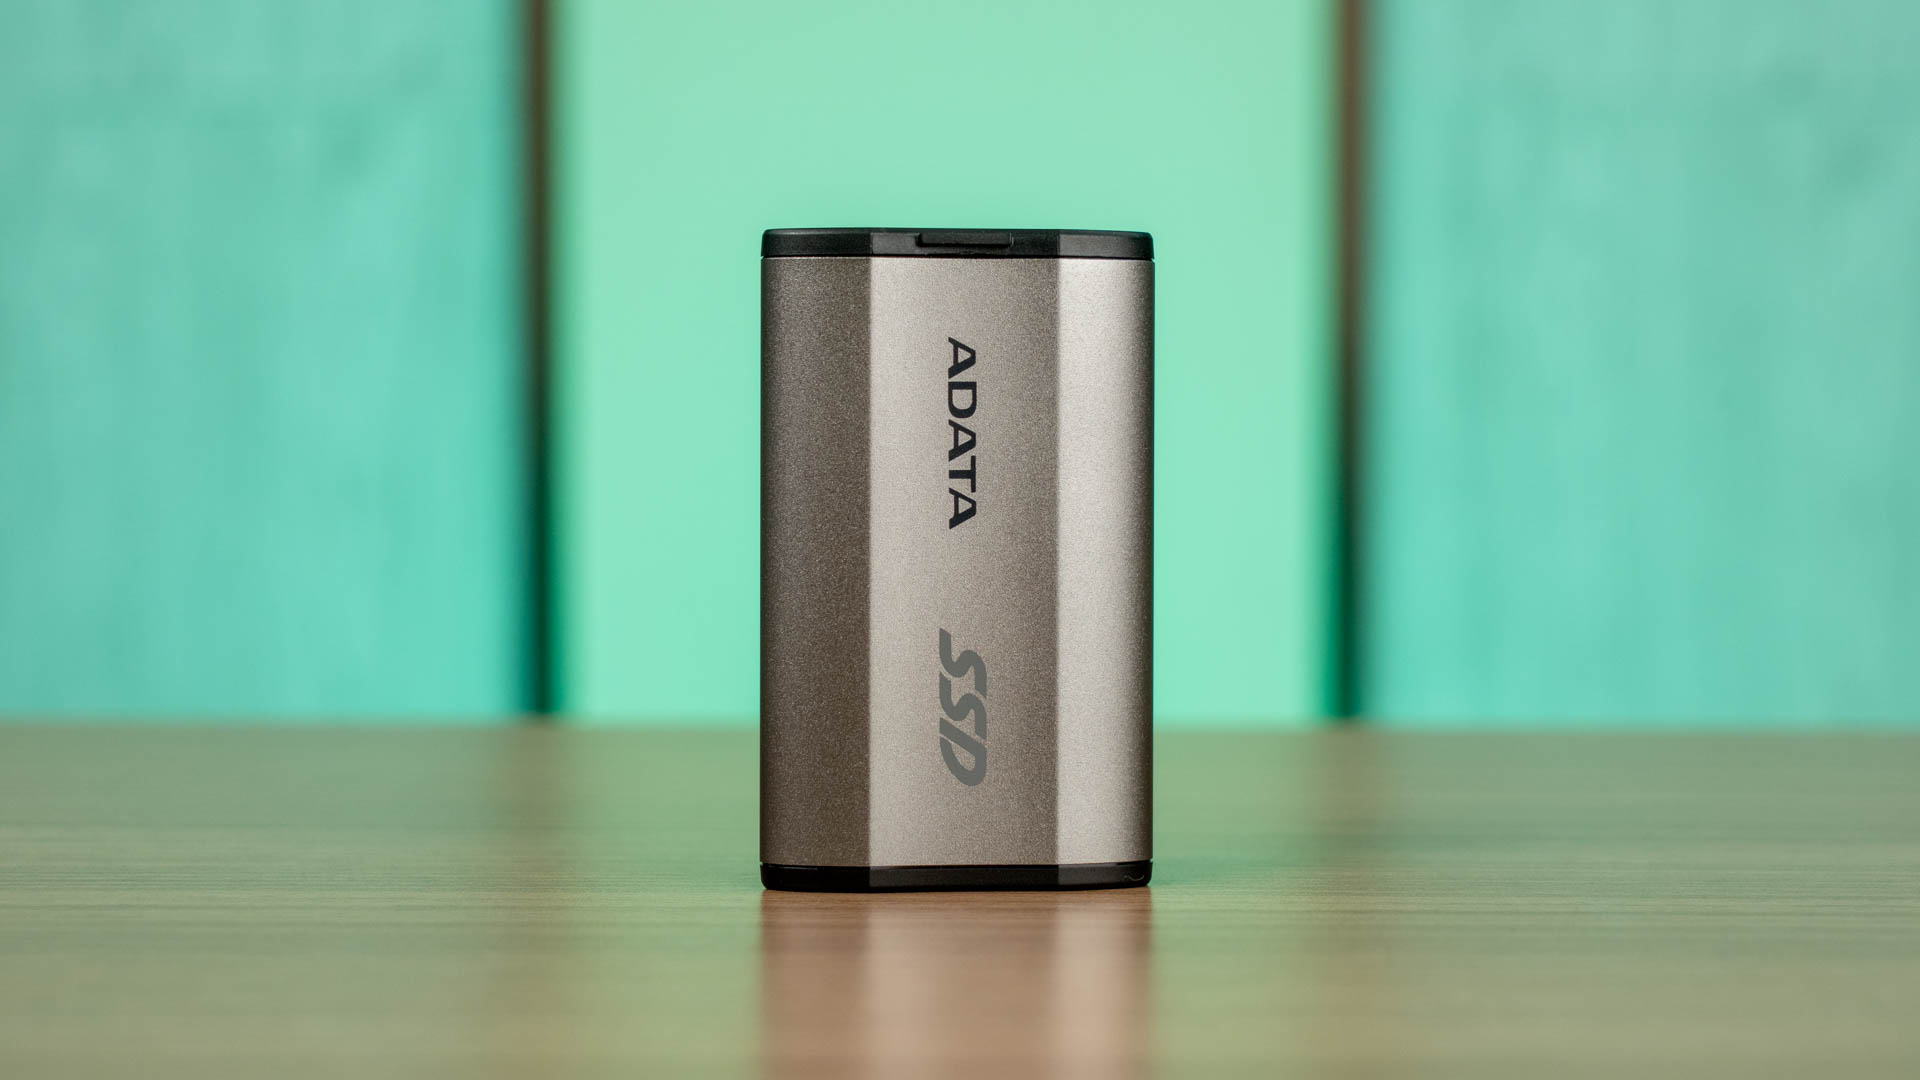 Review – ADATA SD810 portable SSD with IP68 rating